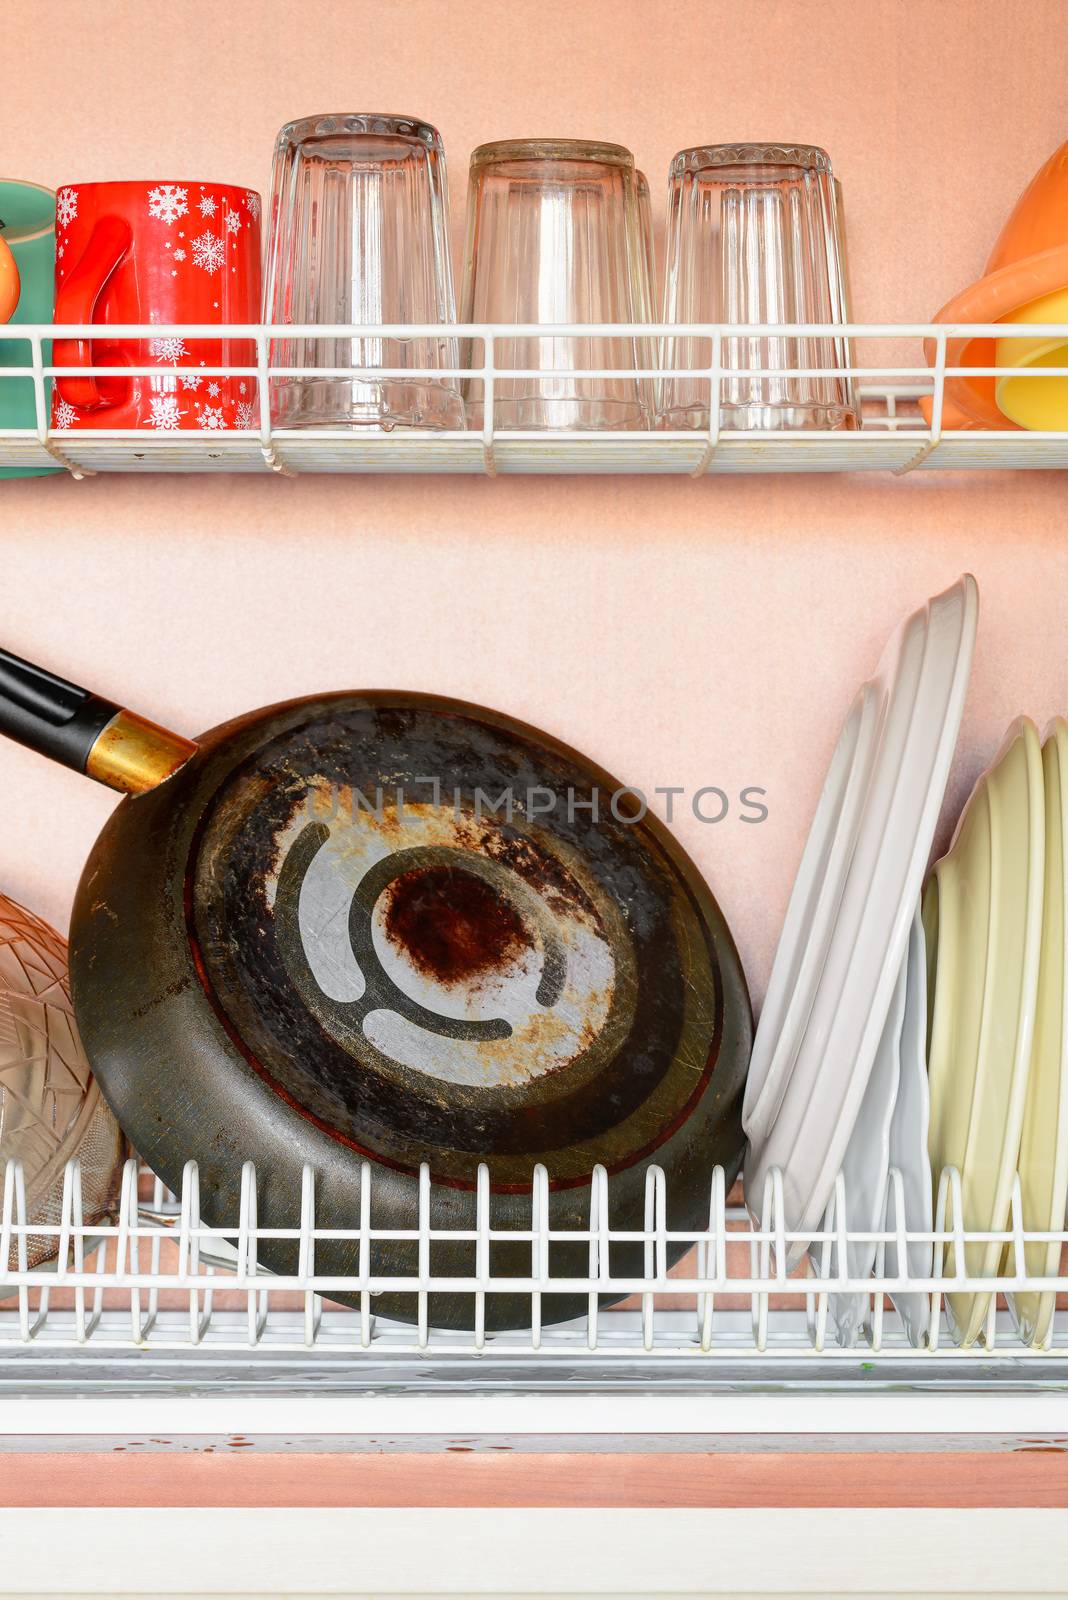 Drying dishes, pan, cups and glasses in the dish rack